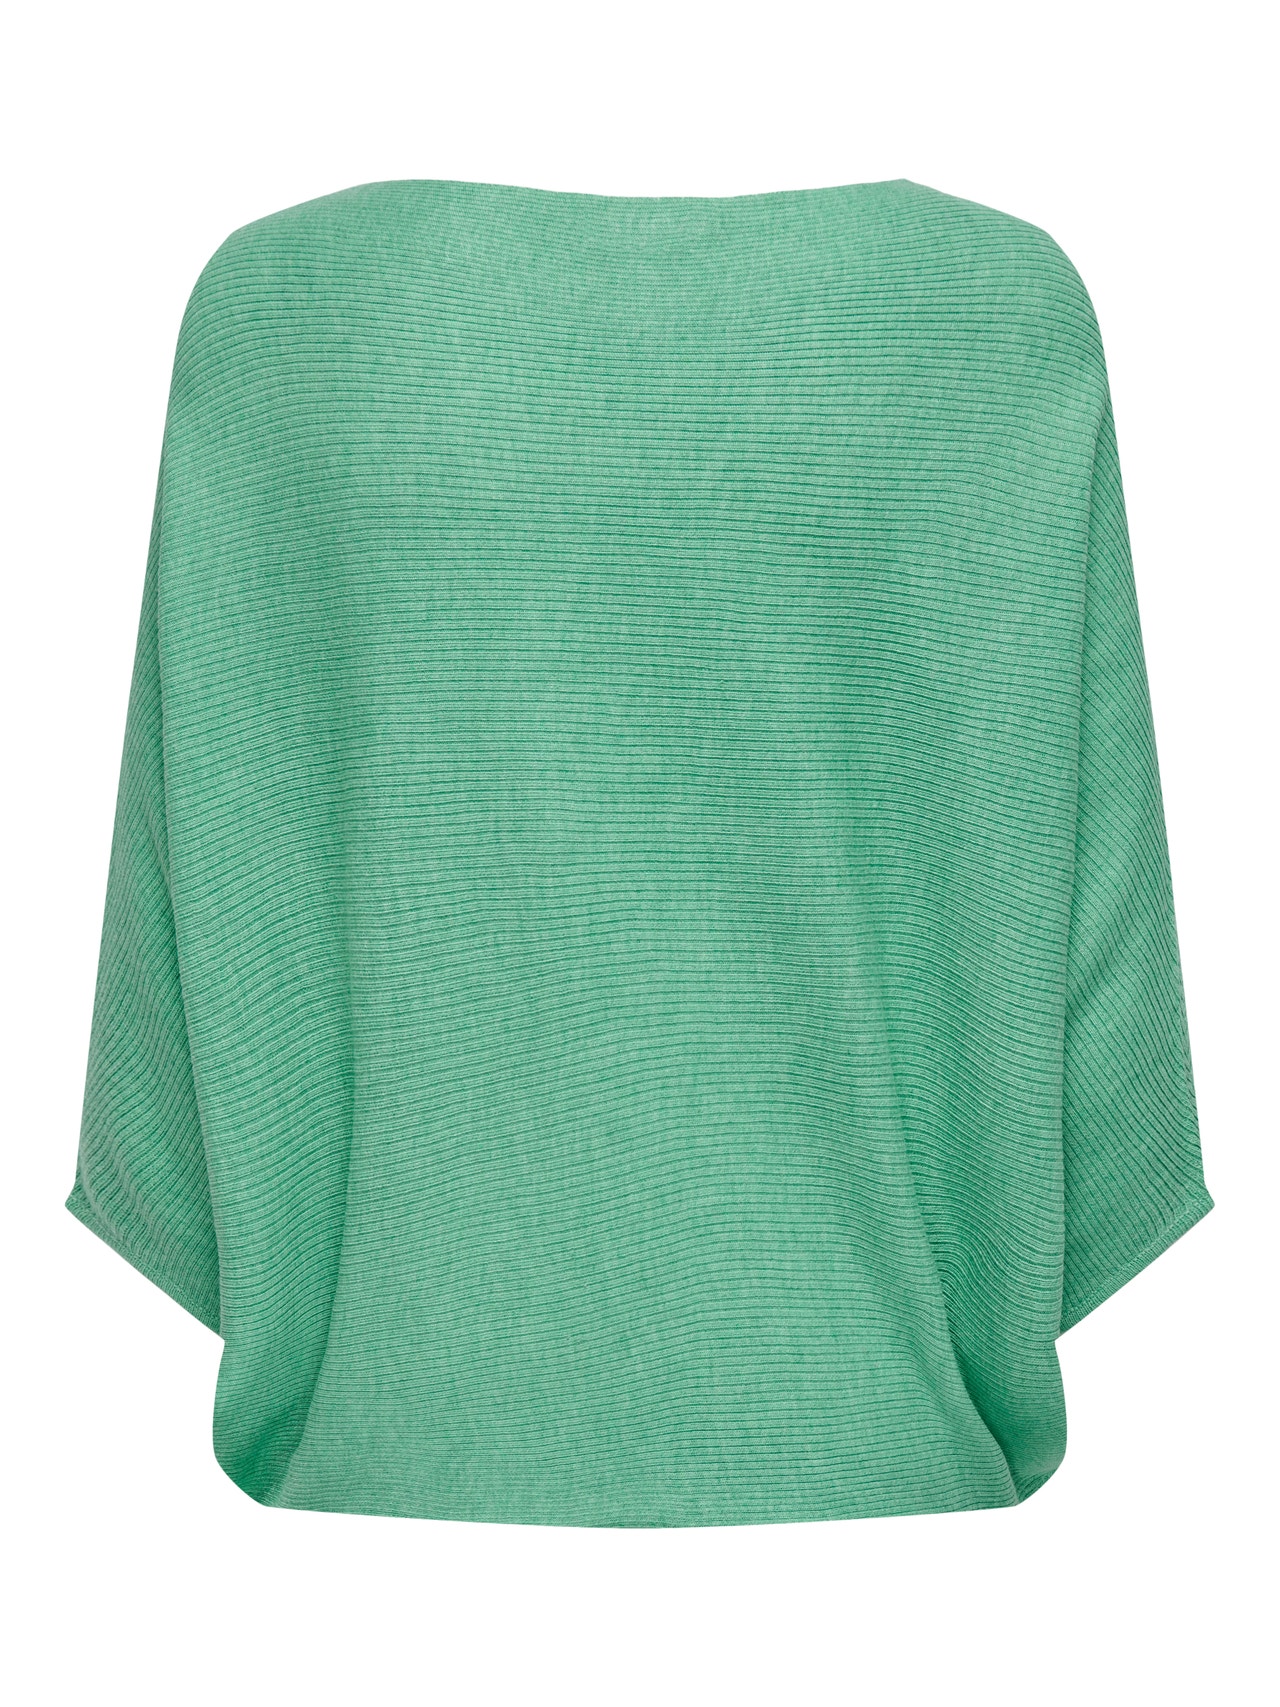 ONLY Knitted pullover with batsleeve -Creme De Menthe - 15181237